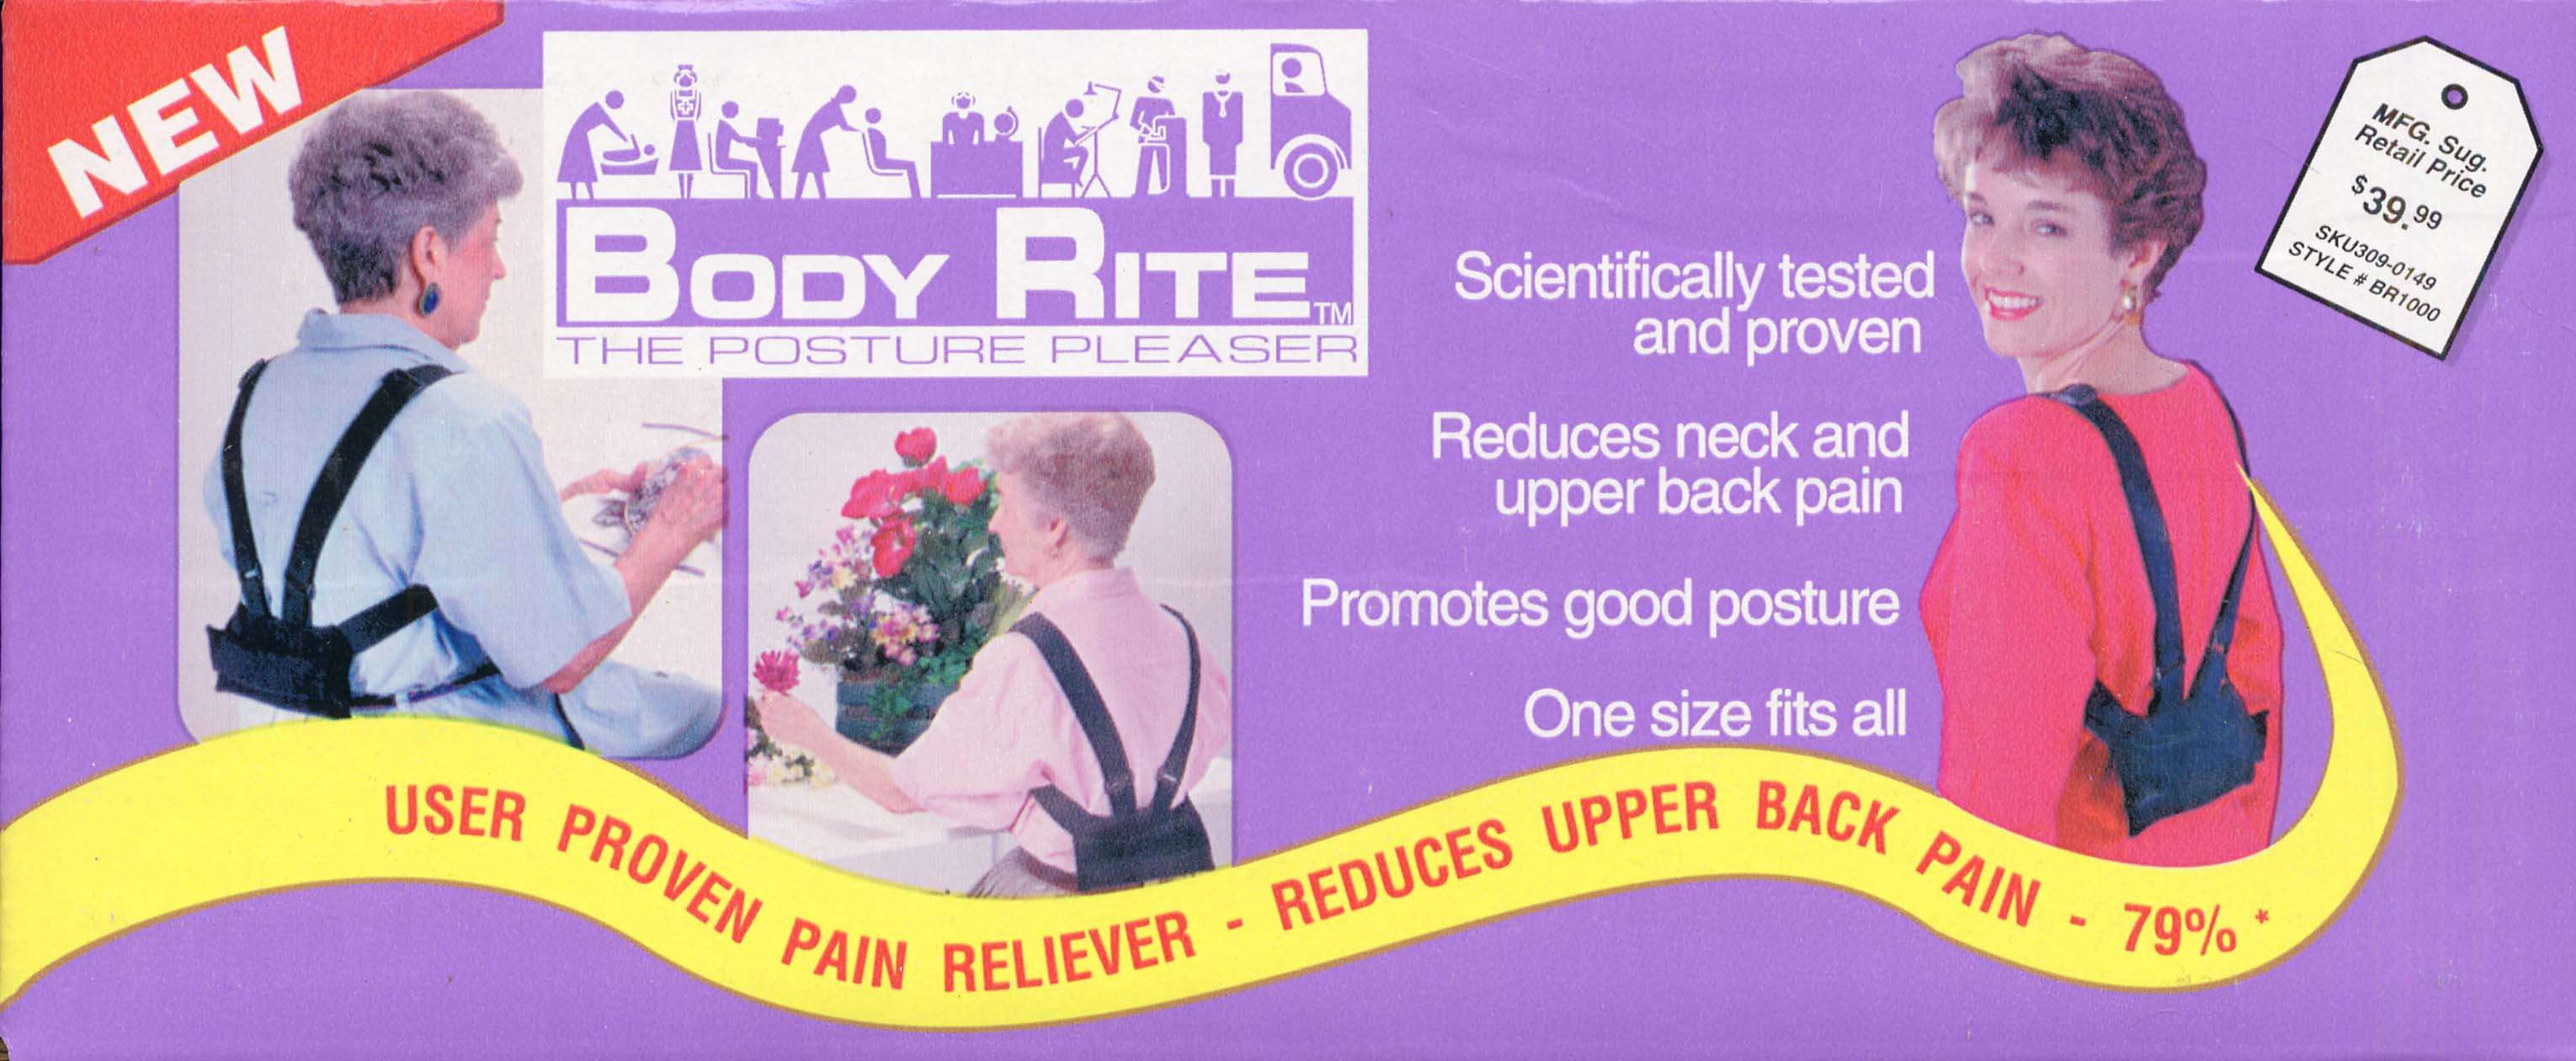 Rite Aid Adjustable Back Stabilizer - One Size